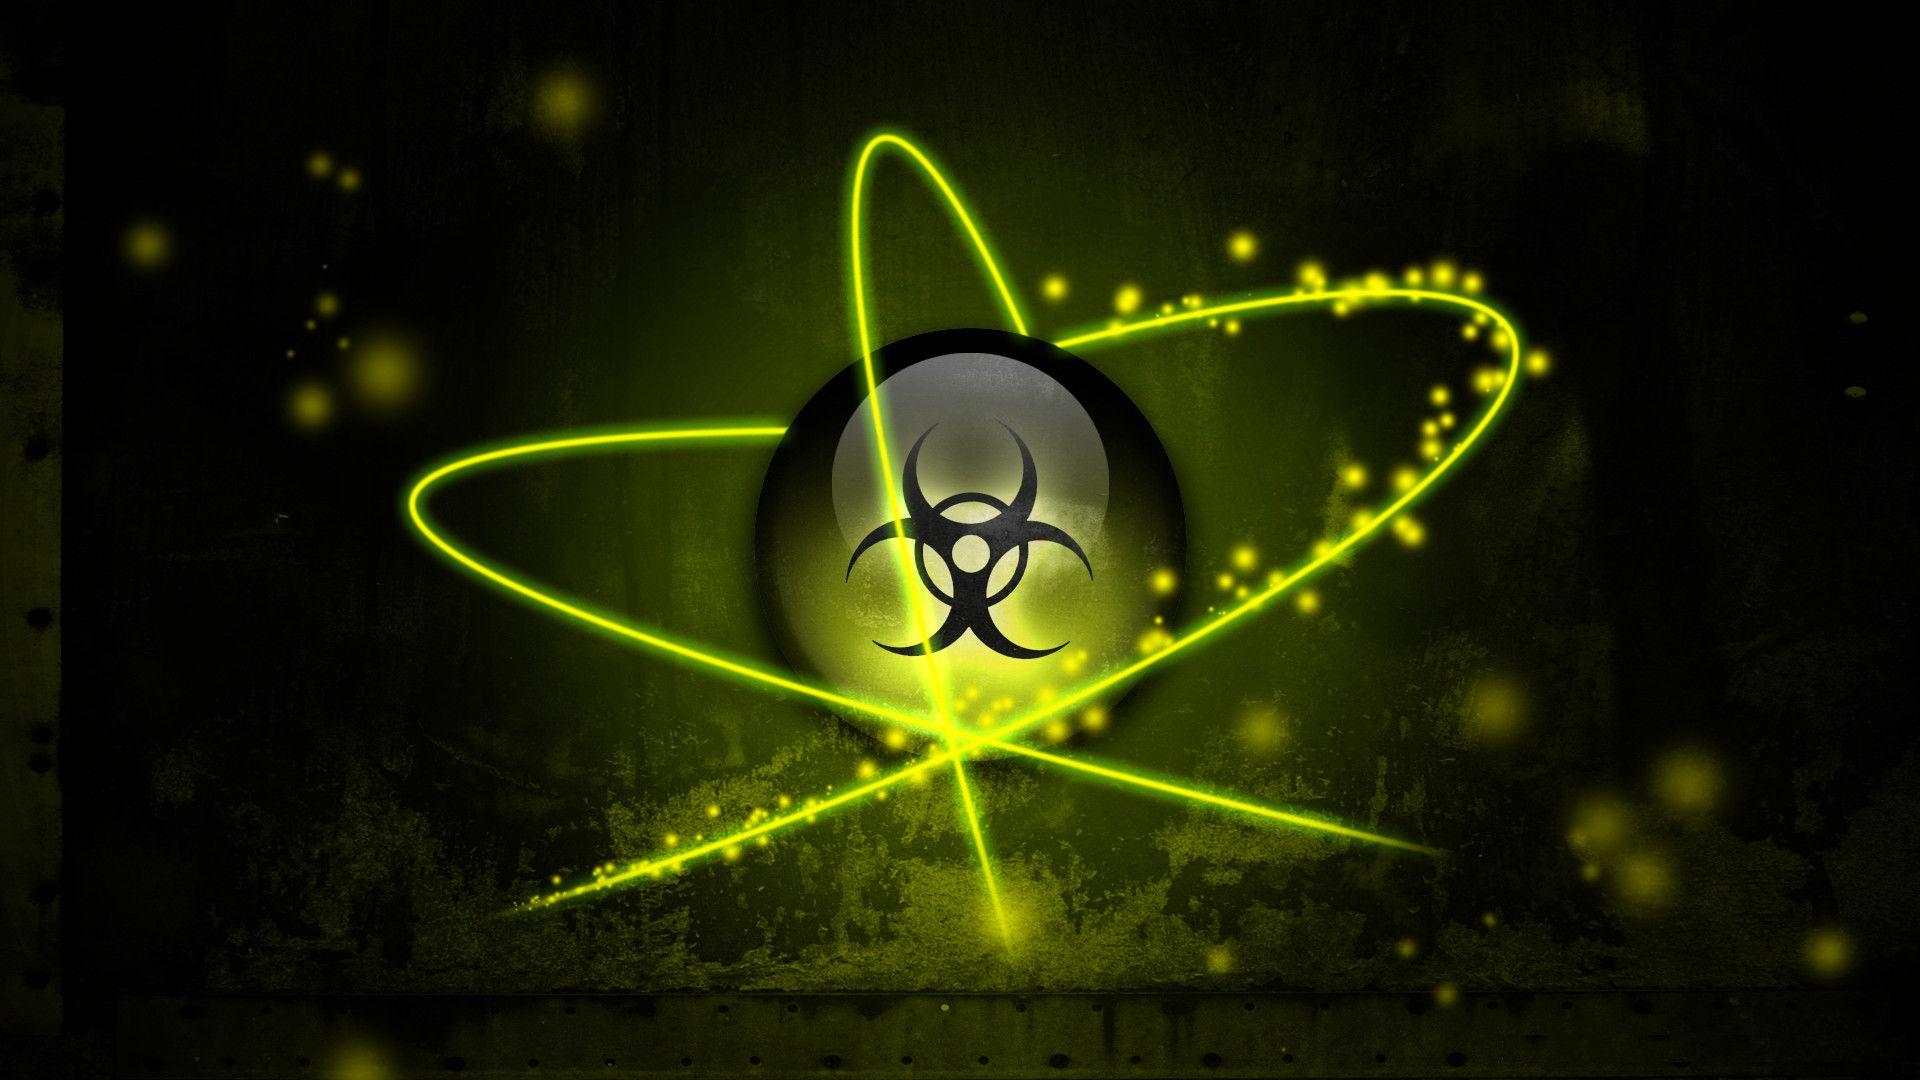 3D Radiation Wallpapers - Top Free 3D Radiation Backgrounds